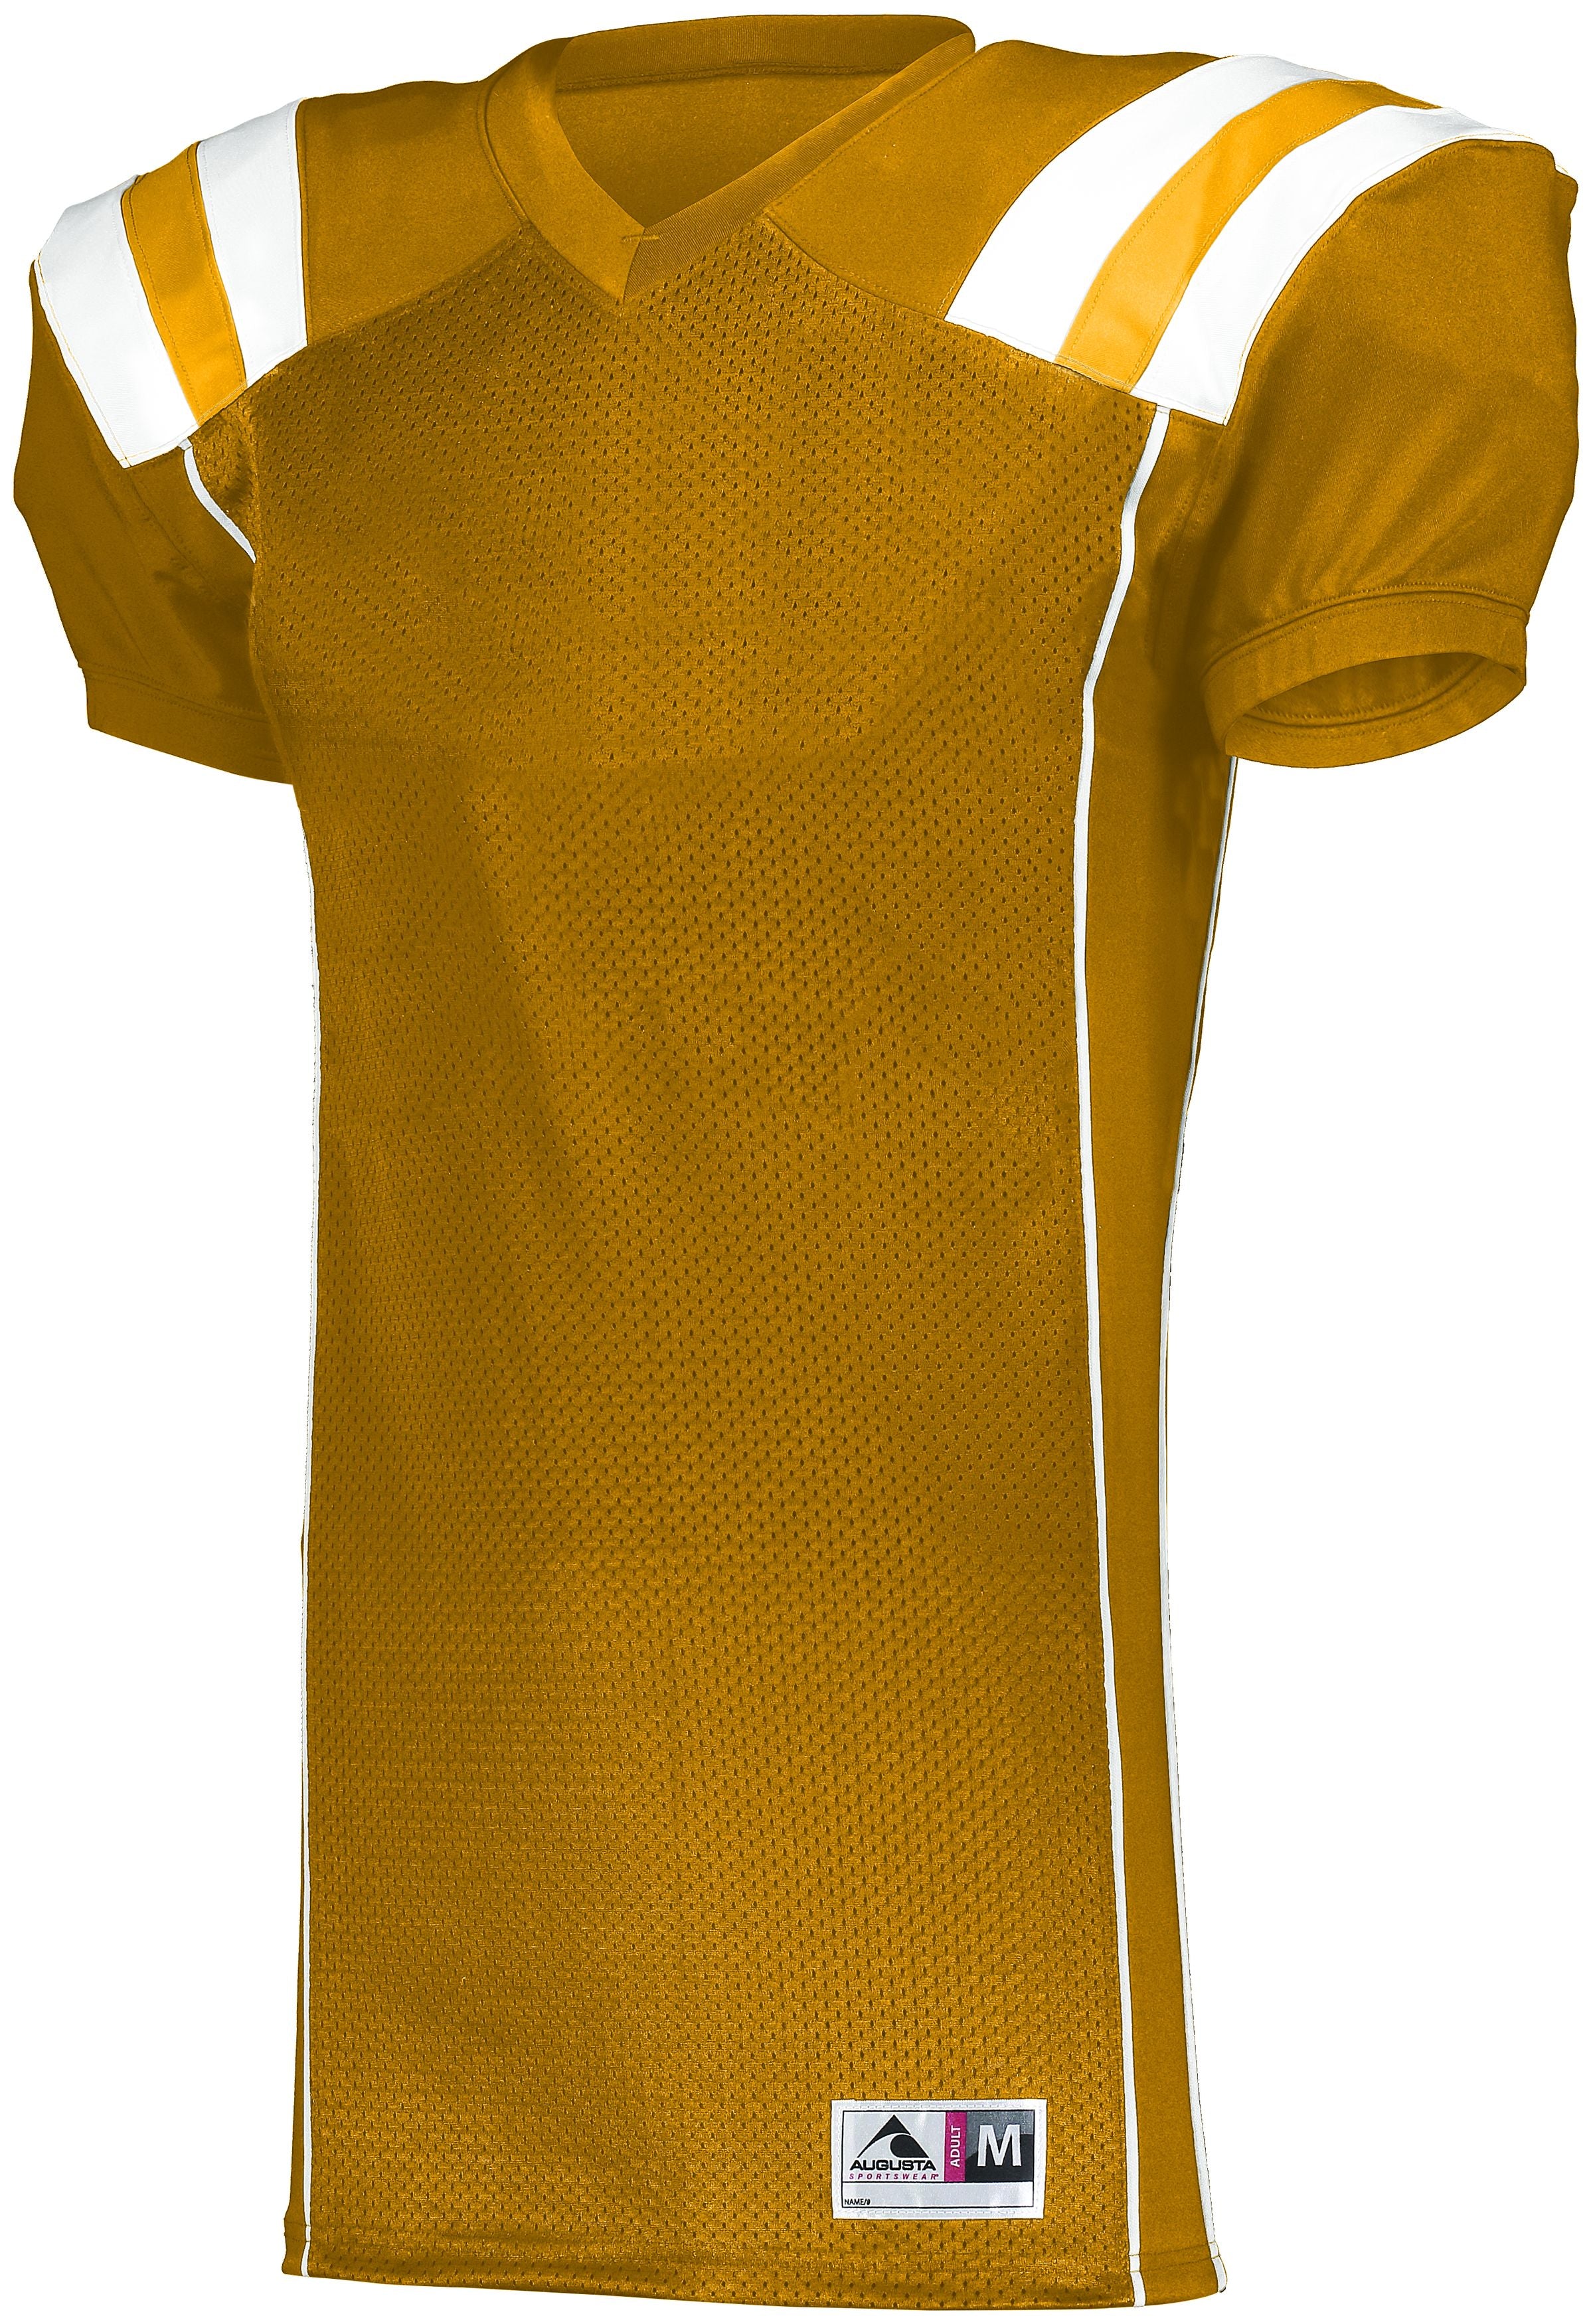 Augusta Sportswear Youth Tform Football Jersey in Gold/White  -Part of the Youth, Youth-Jersey, Augusta-Products, Football, Shirts, All-Sports, All-Sports-1 product lines at KanaleyCreations.com